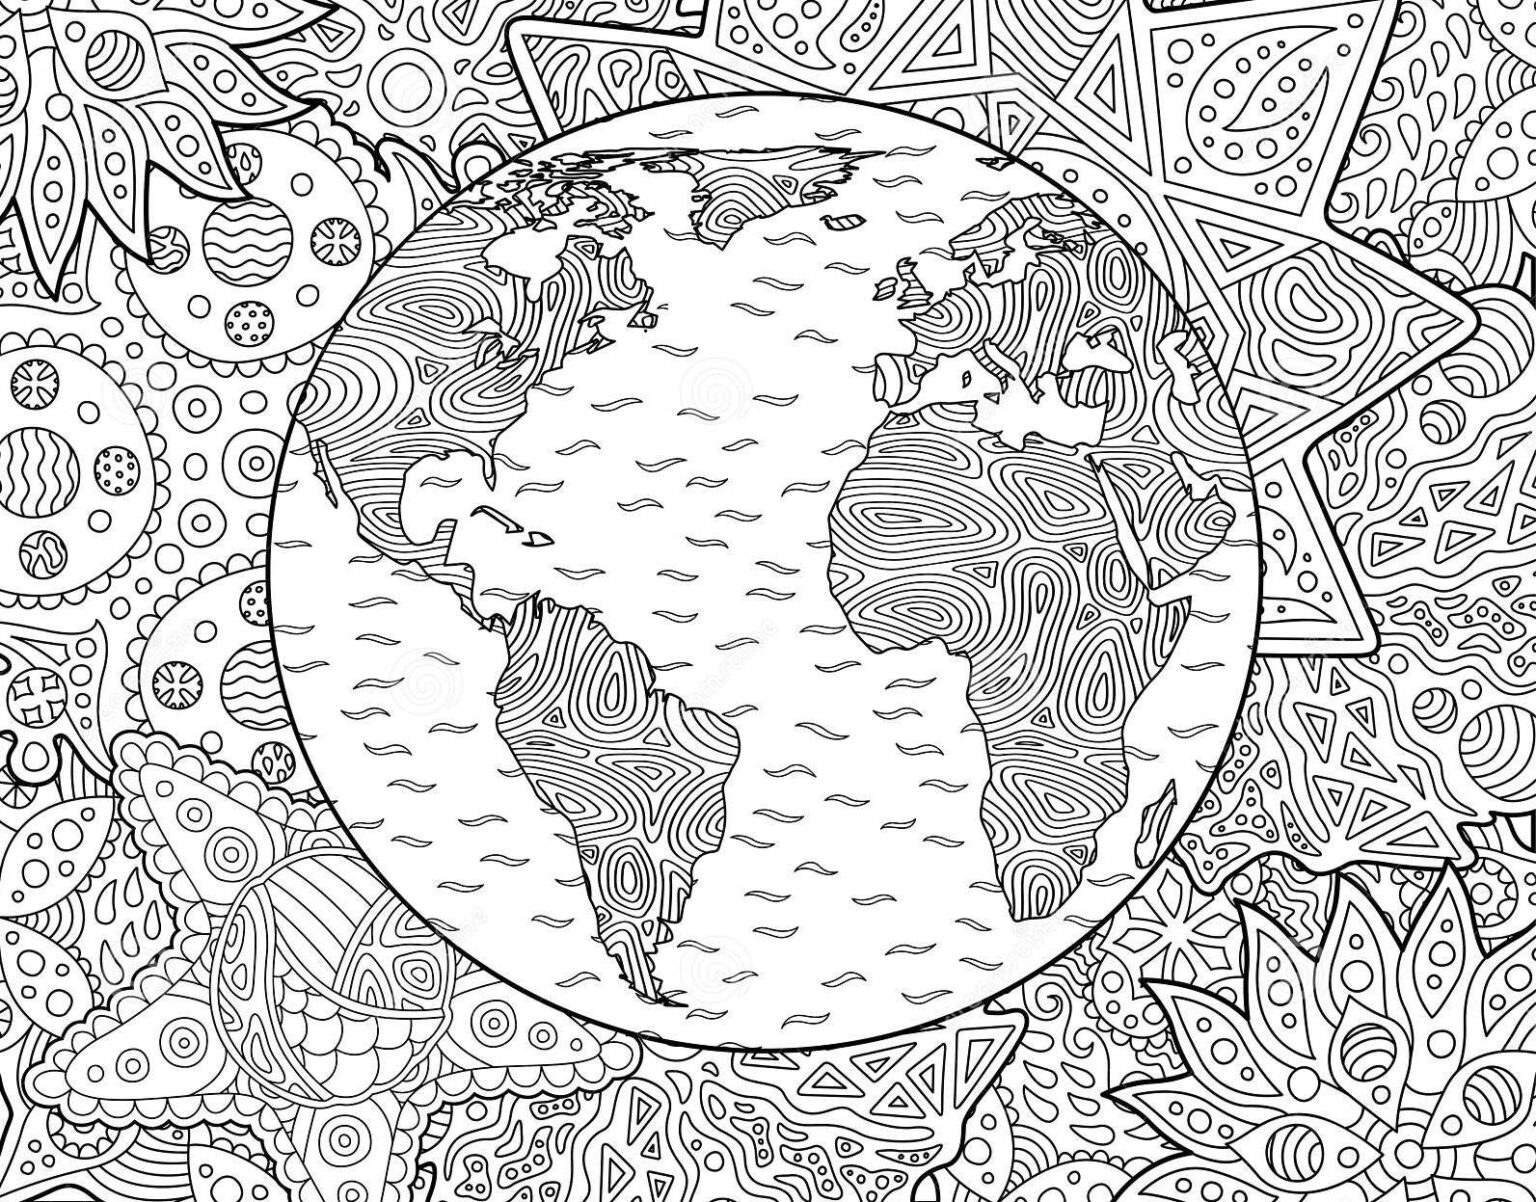 50-free-printable-travel-coloring-book-pages-while-we-re-stuck-at-home